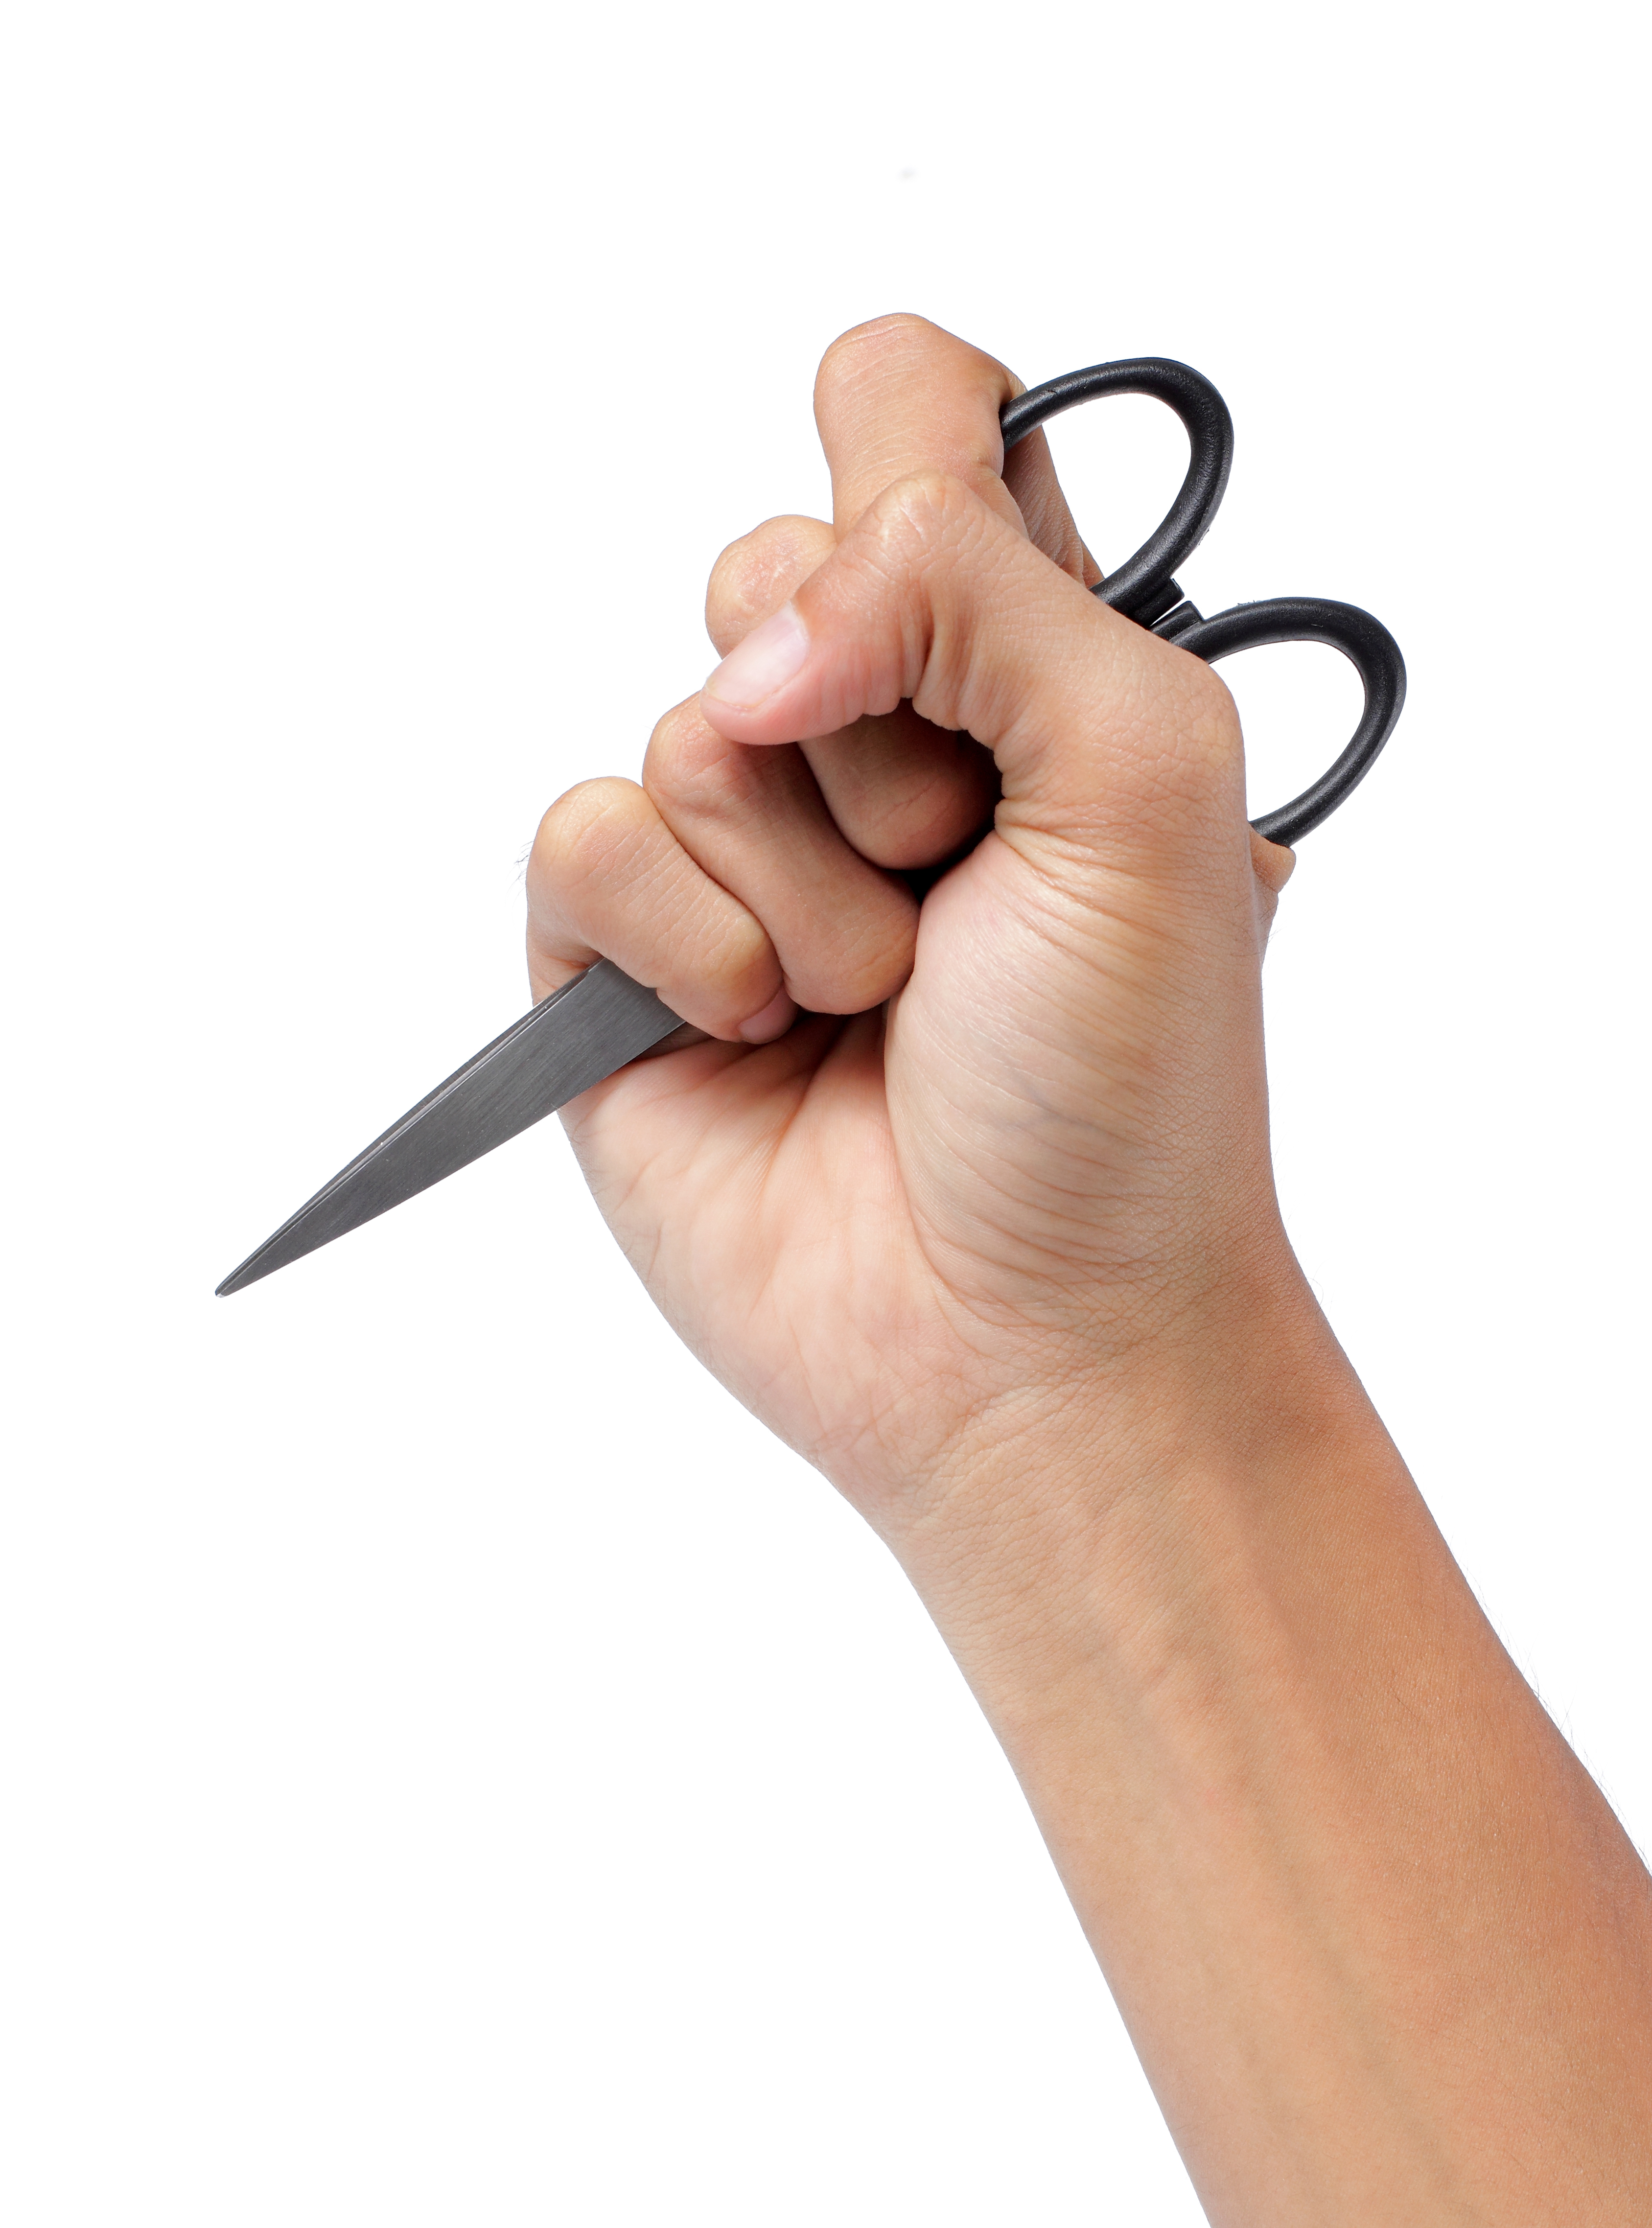 Pictured is a hand holding scissors in a stabbing position. SHUTTERSTOCK/ Odua Images